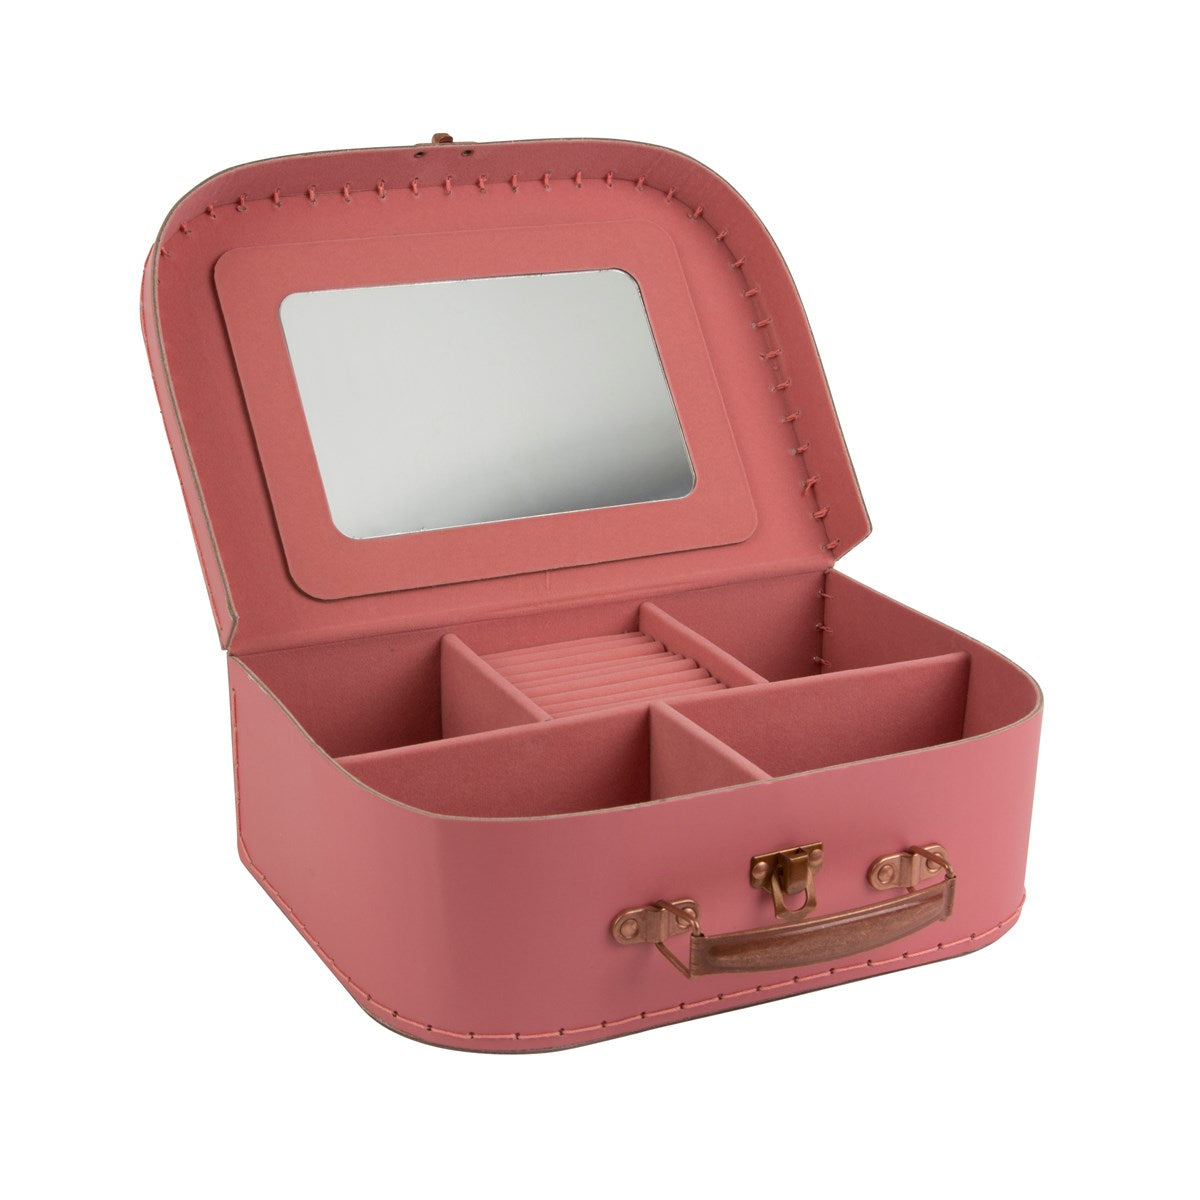 Pink jewellery carry case with gold pretty little thing writing on the front